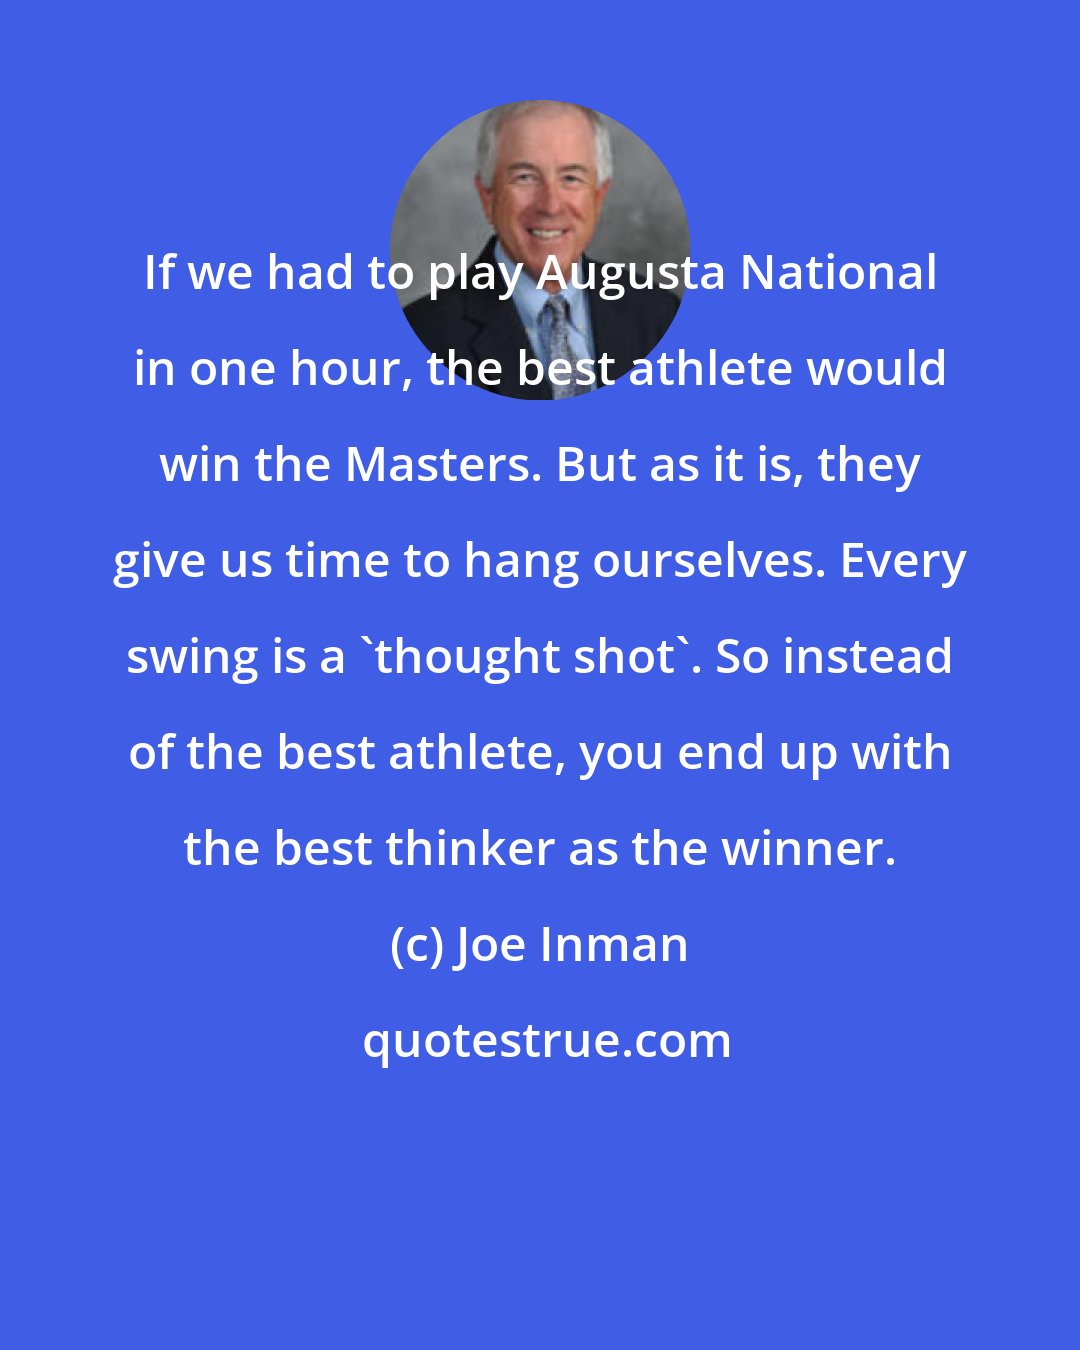 Joe Inman: If we had to play Augusta National in one hour, the best athlete would win the Masters. But as it is, they give us time to hang ourselves. Every swing is a 'thought shot'. So instead of the best athlete, you end up with the best thinker as the winner.